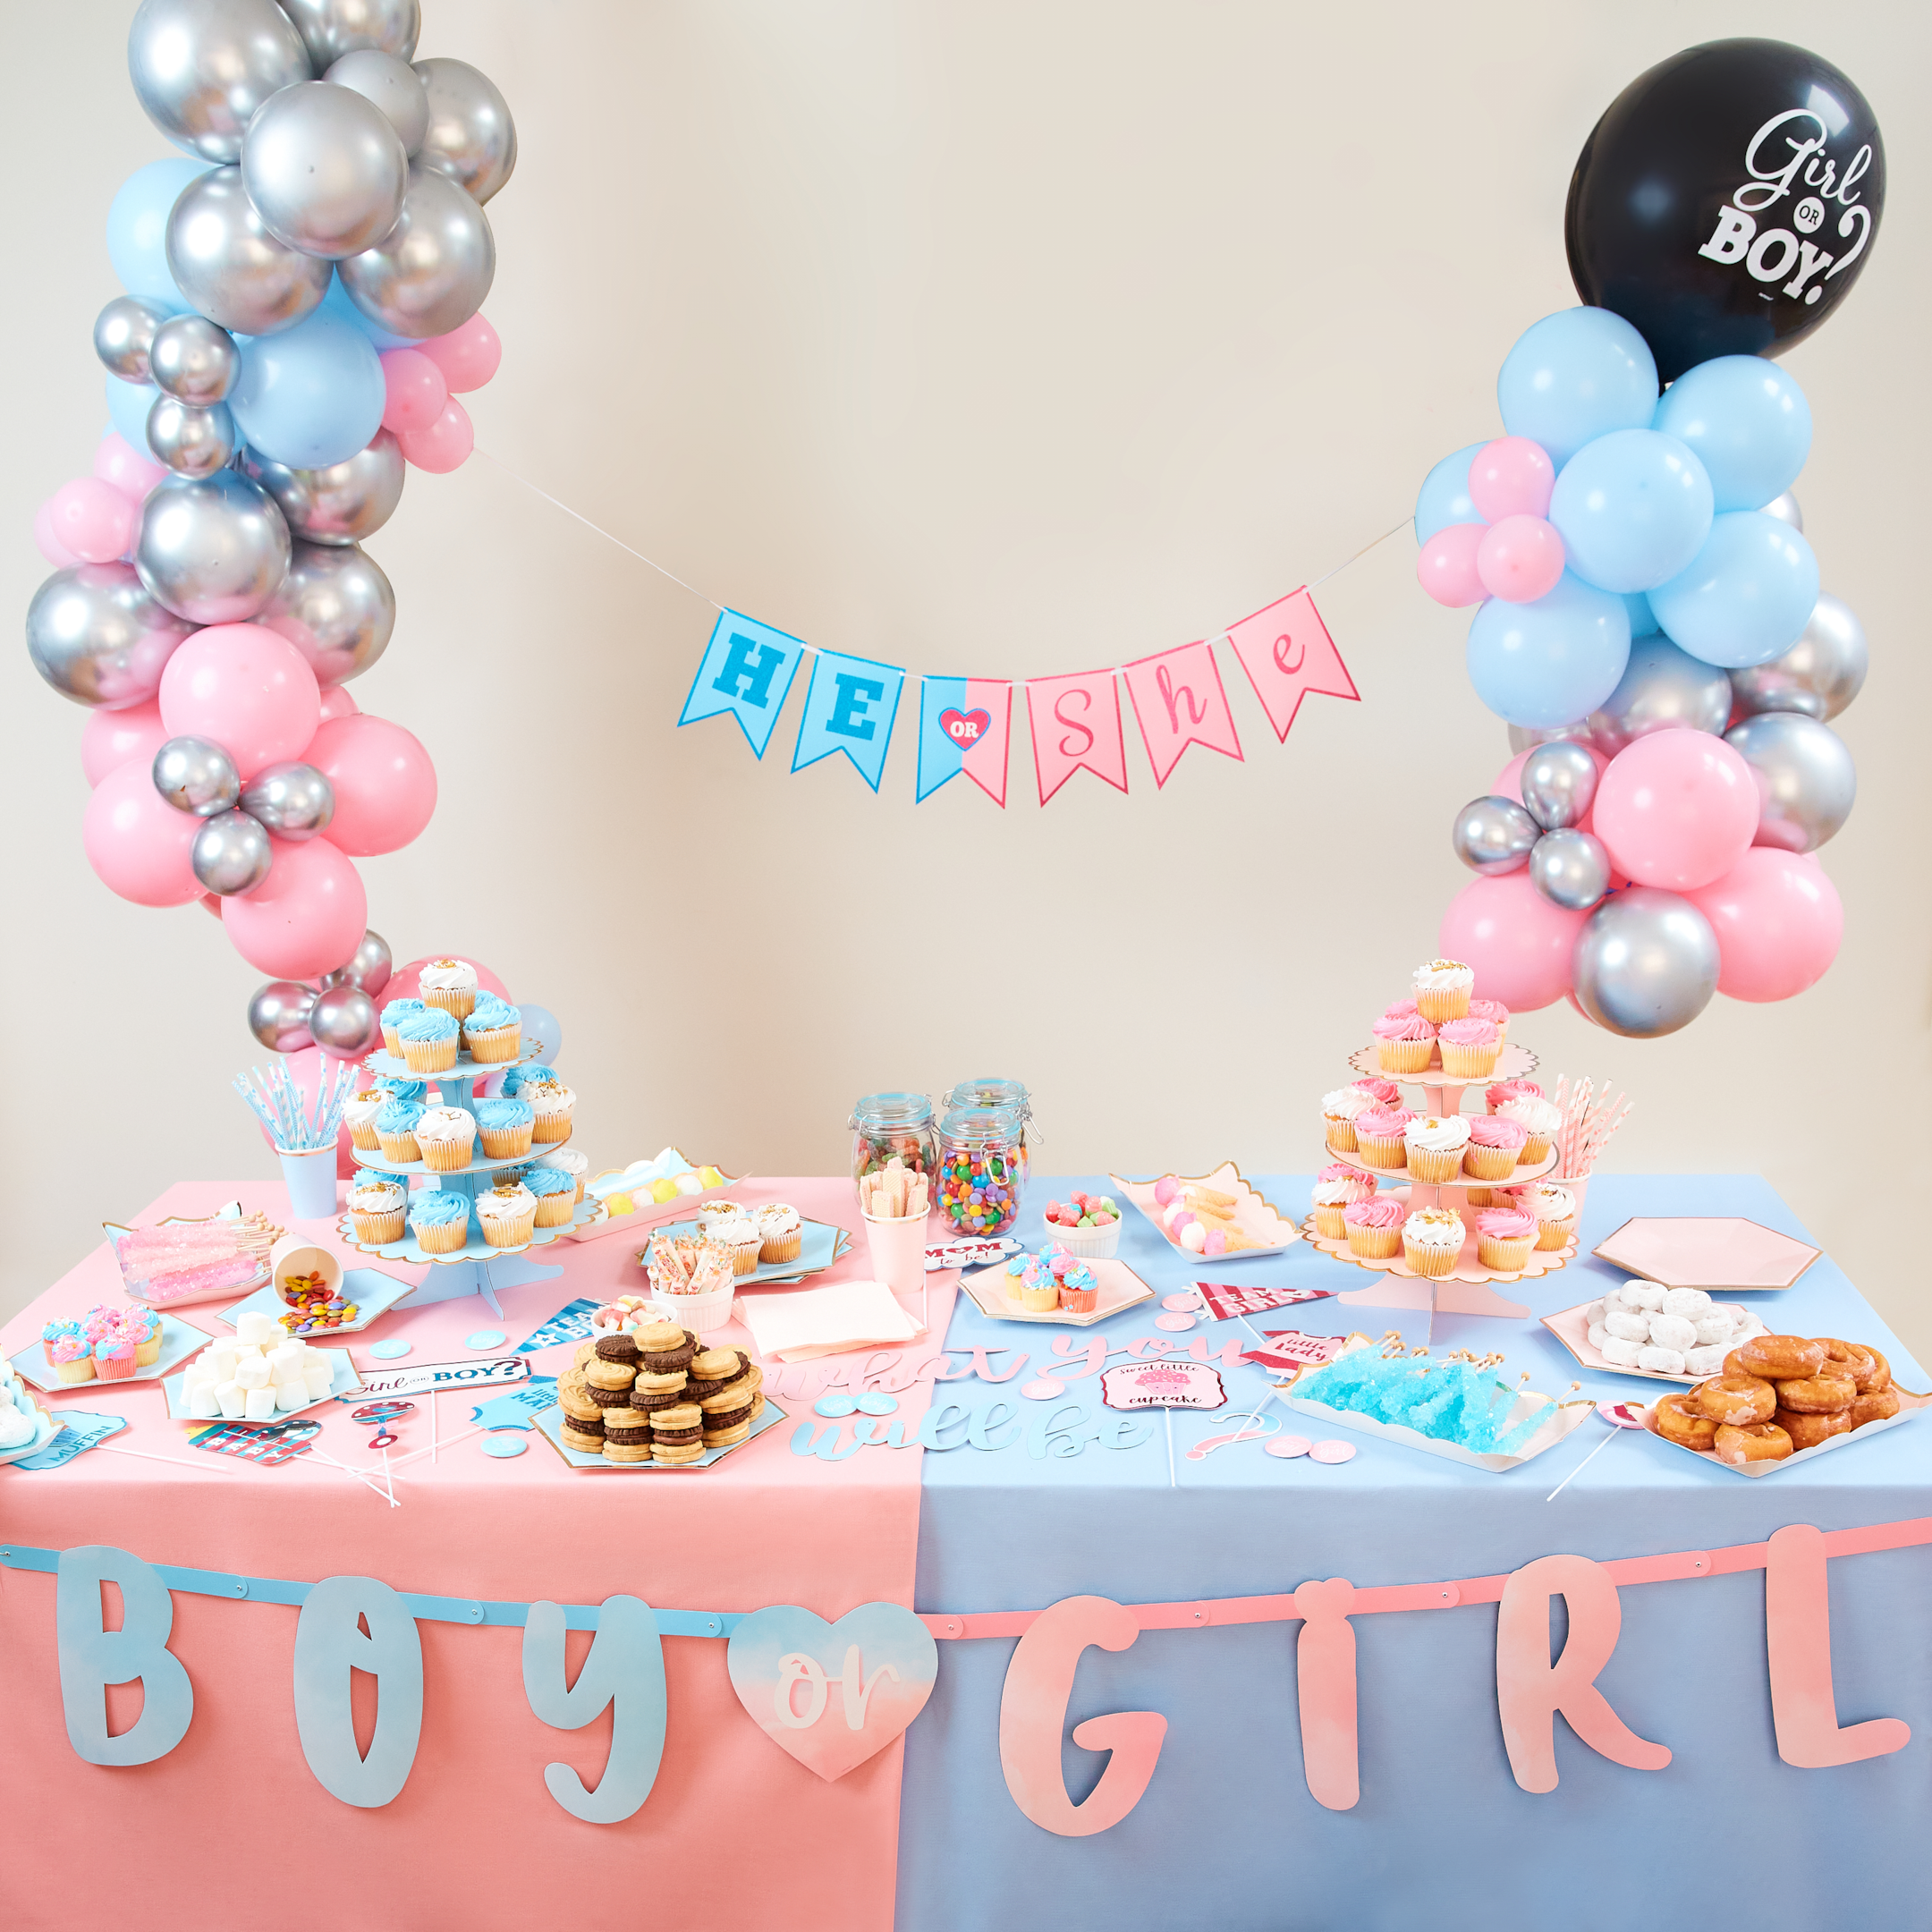 Gender Reveal Party Decorations Ideas with sweet table blue and pink.